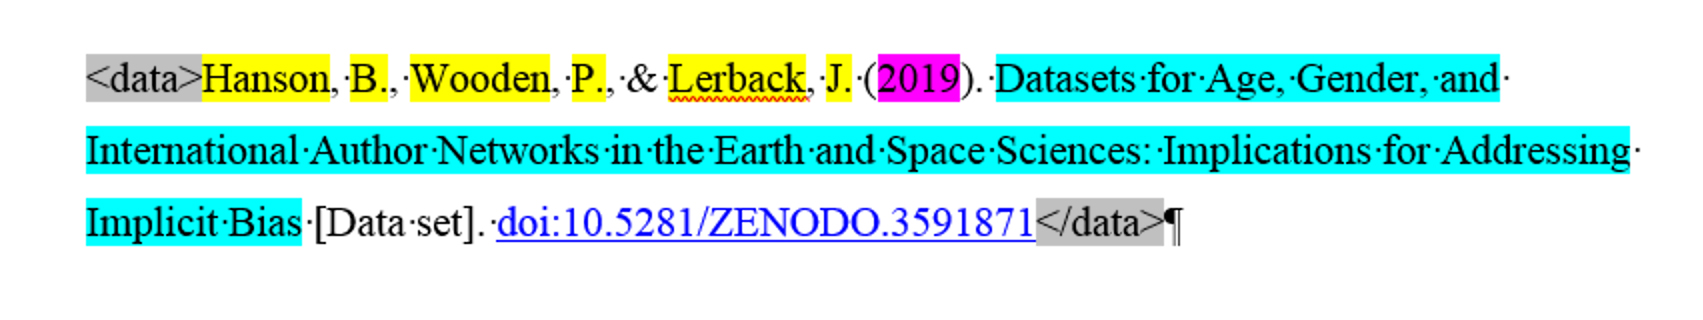 Screenshot of a reference entry processed by eXtyles: <data>Hanson, B., Wooden, P., & Lerback, J. (2019). Datasets for Age, Gender, and International Author Networks in the Earth and Space Sciences: Implications for Addressing Implicit Bias [Data set]. doi:10.5281/ZENODO.3591871</data>